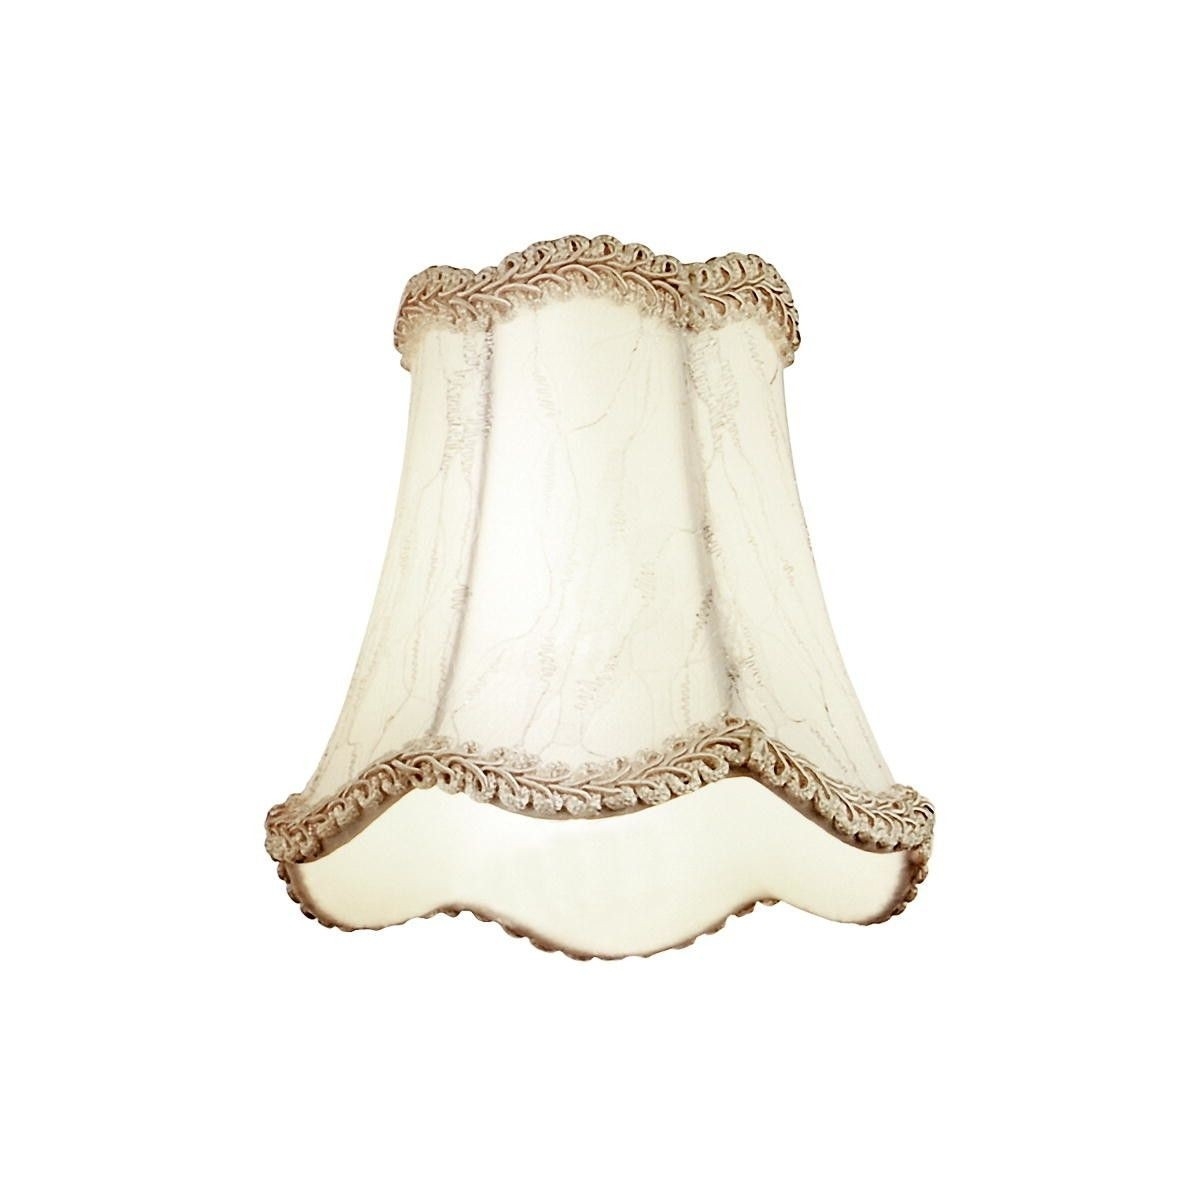 5 1/2" tall Beige/ Olive Lamp Shade with Beads and Fringe 